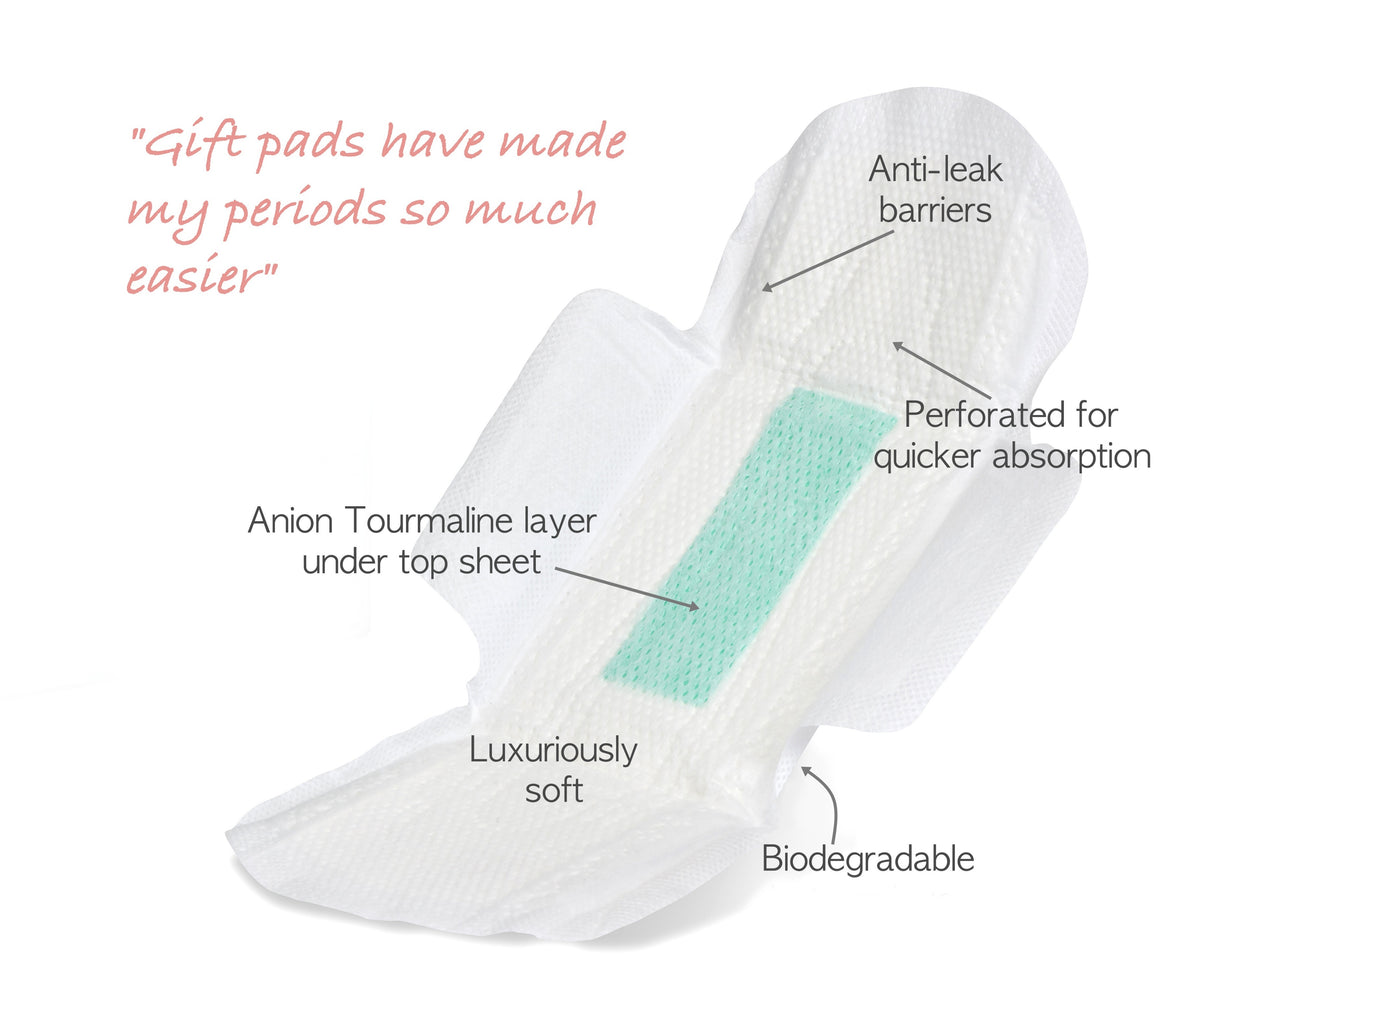 GIFT Long Anion Sanitary Pads with wings - 10 Pads * New Improved Biodegradable Design - giftwellness